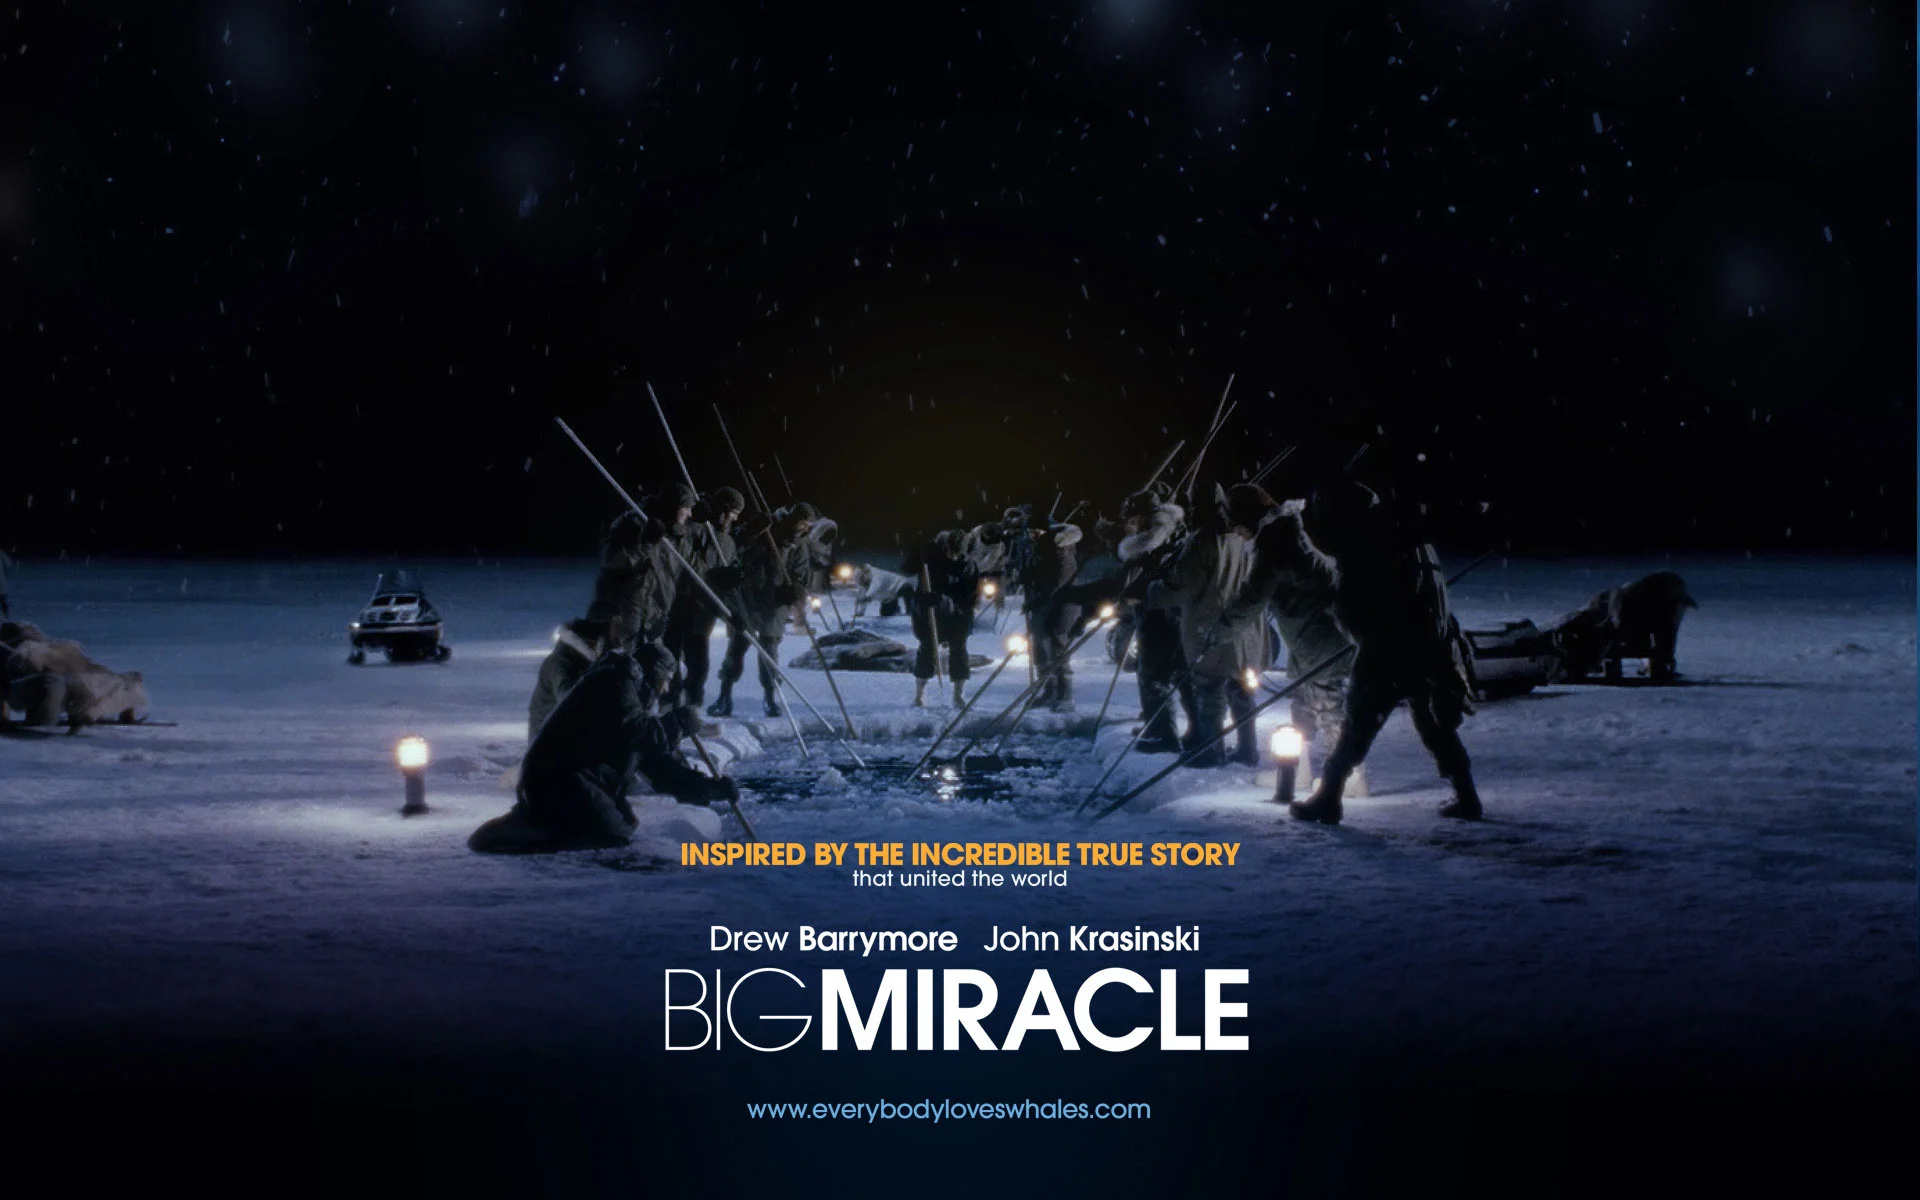 Big Miracle: Filming began in September 2010, with Drew Barrymore and John Krasinski in the starring roles. 1920x1200 HD Wallpaper.